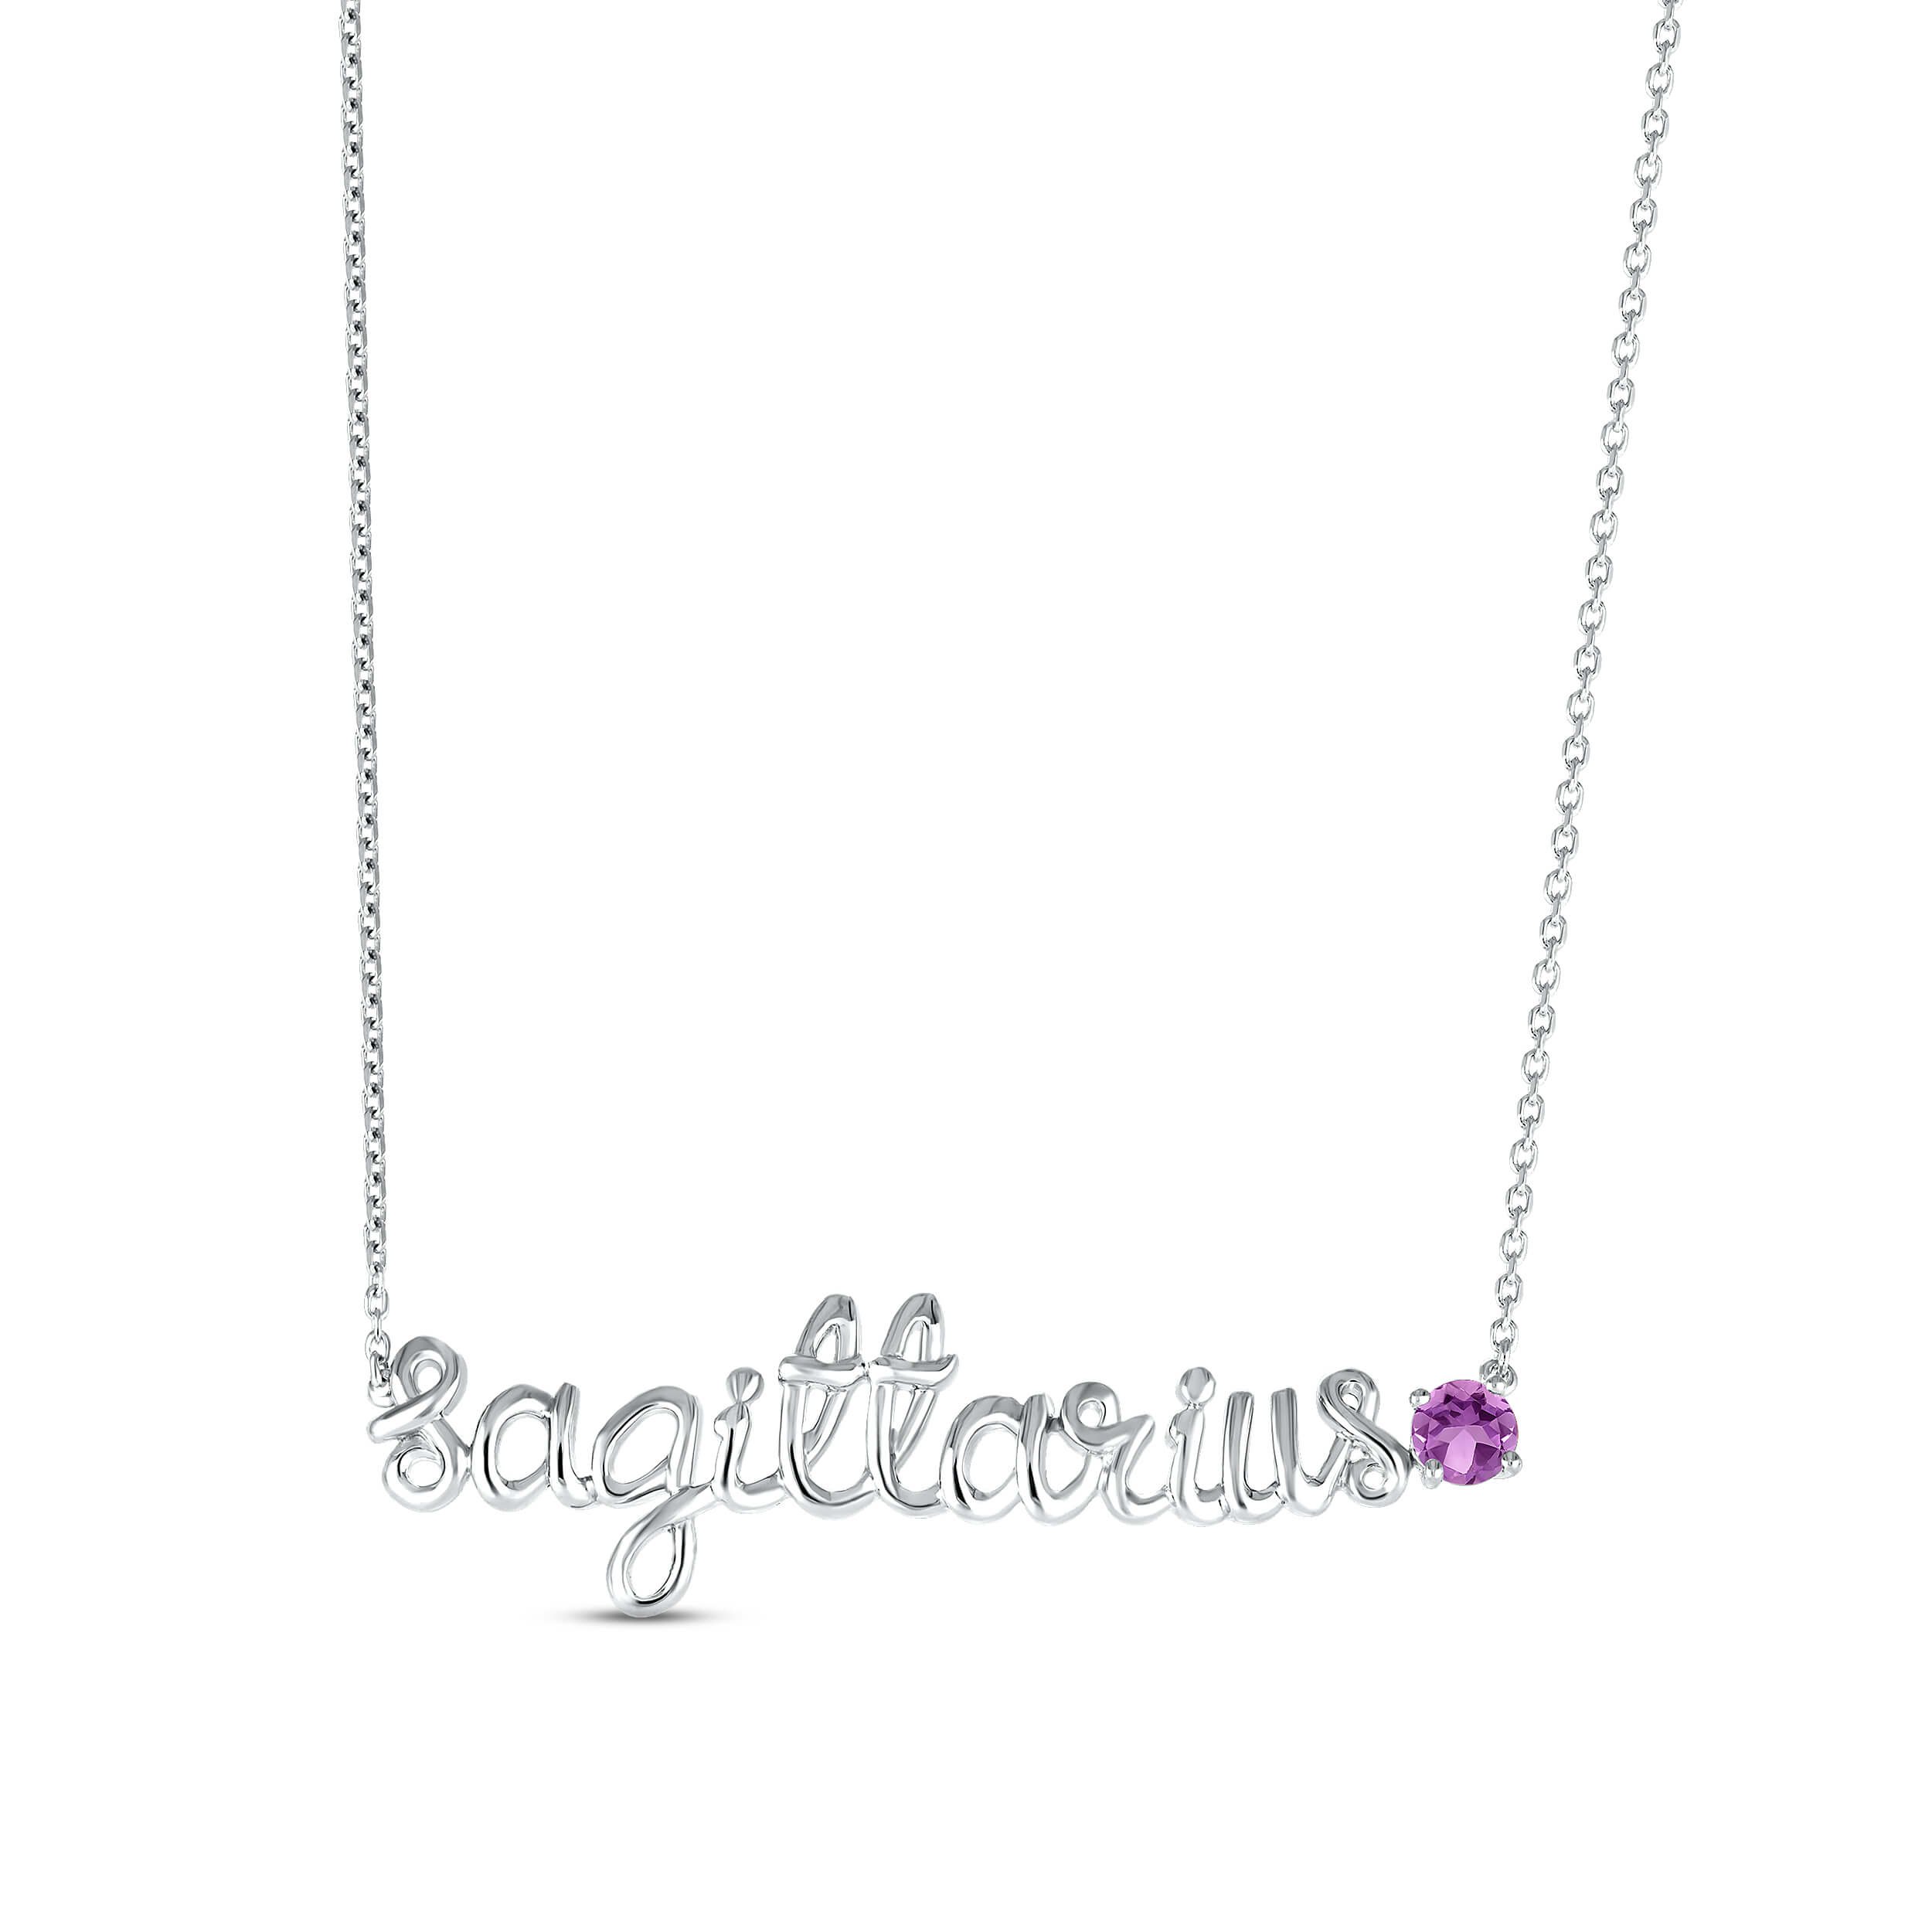 Kay Jewelers Amethyst and Sterling Sagittarius Necklace, $79.99